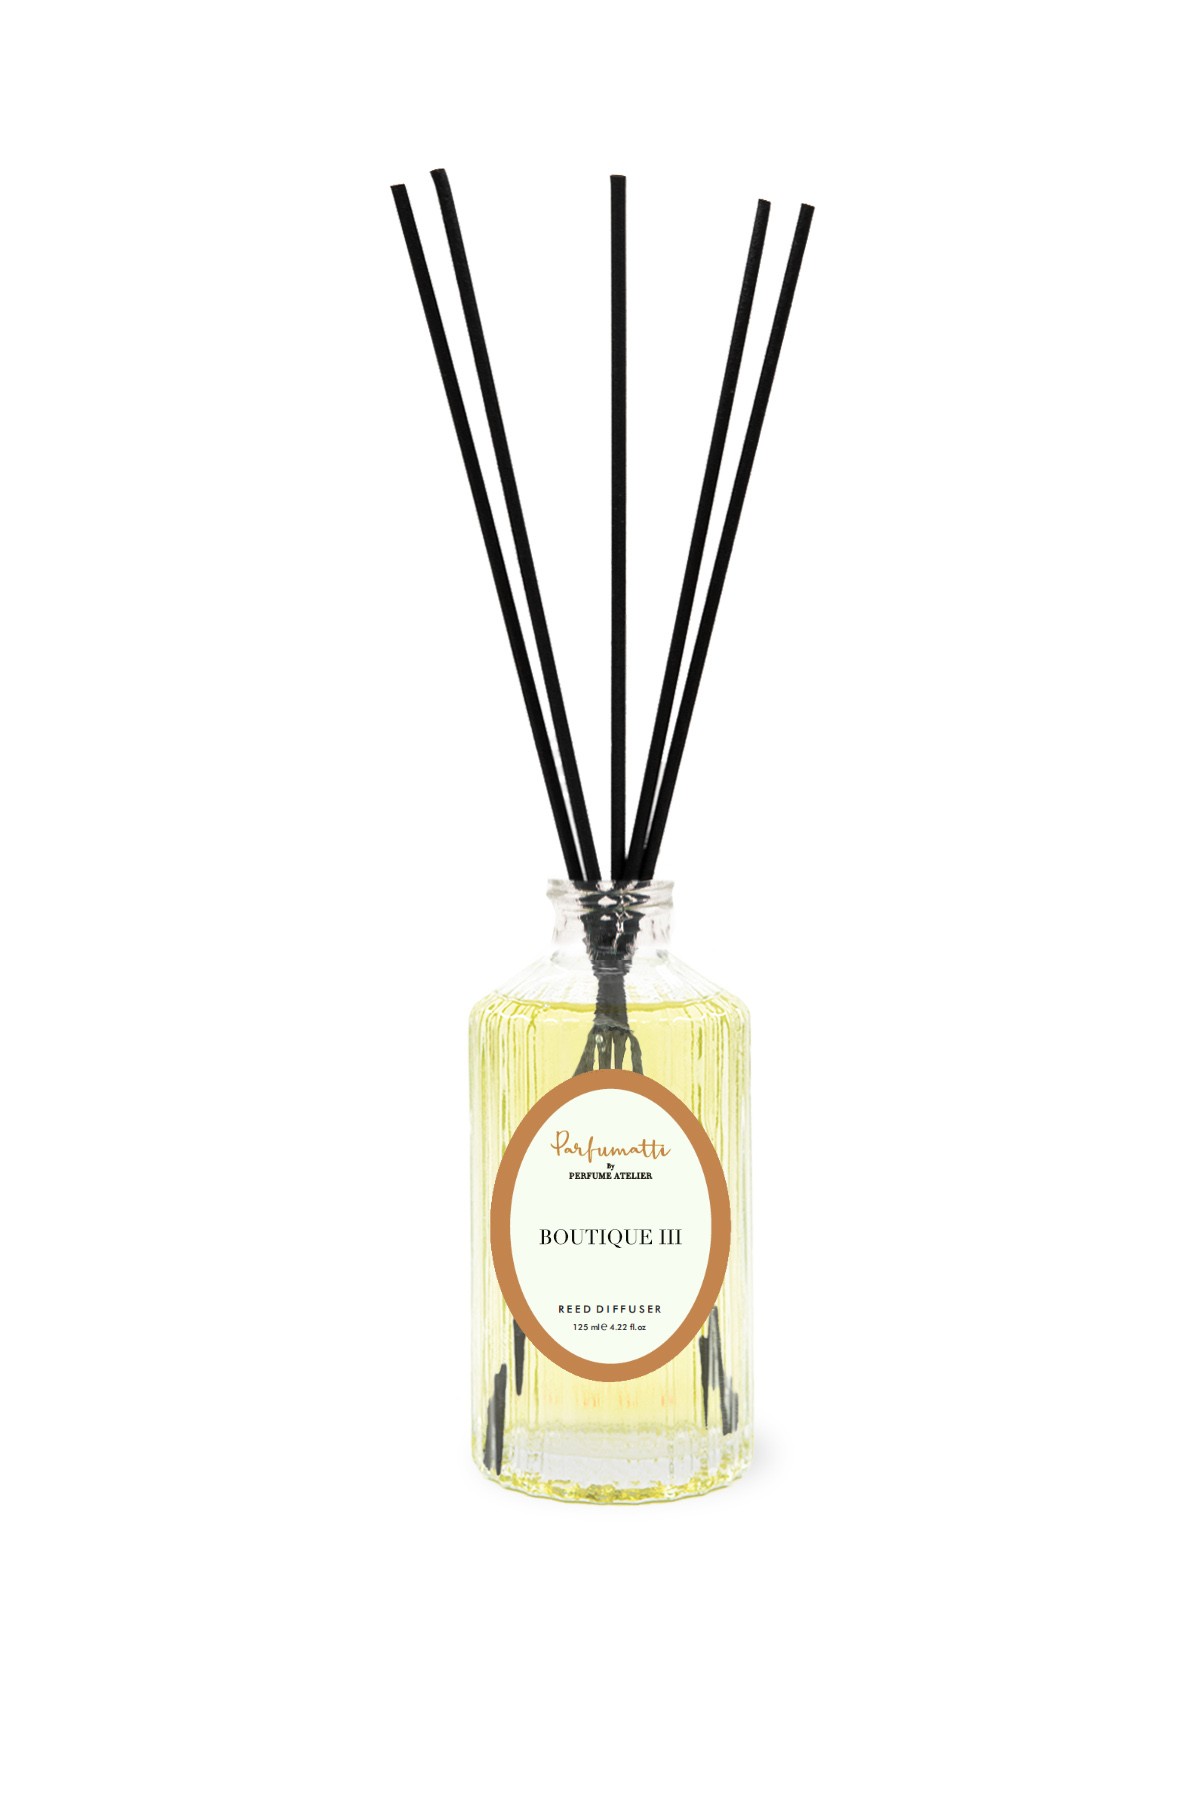 BOUTIQUE III 125 Ml Reed Diffuser